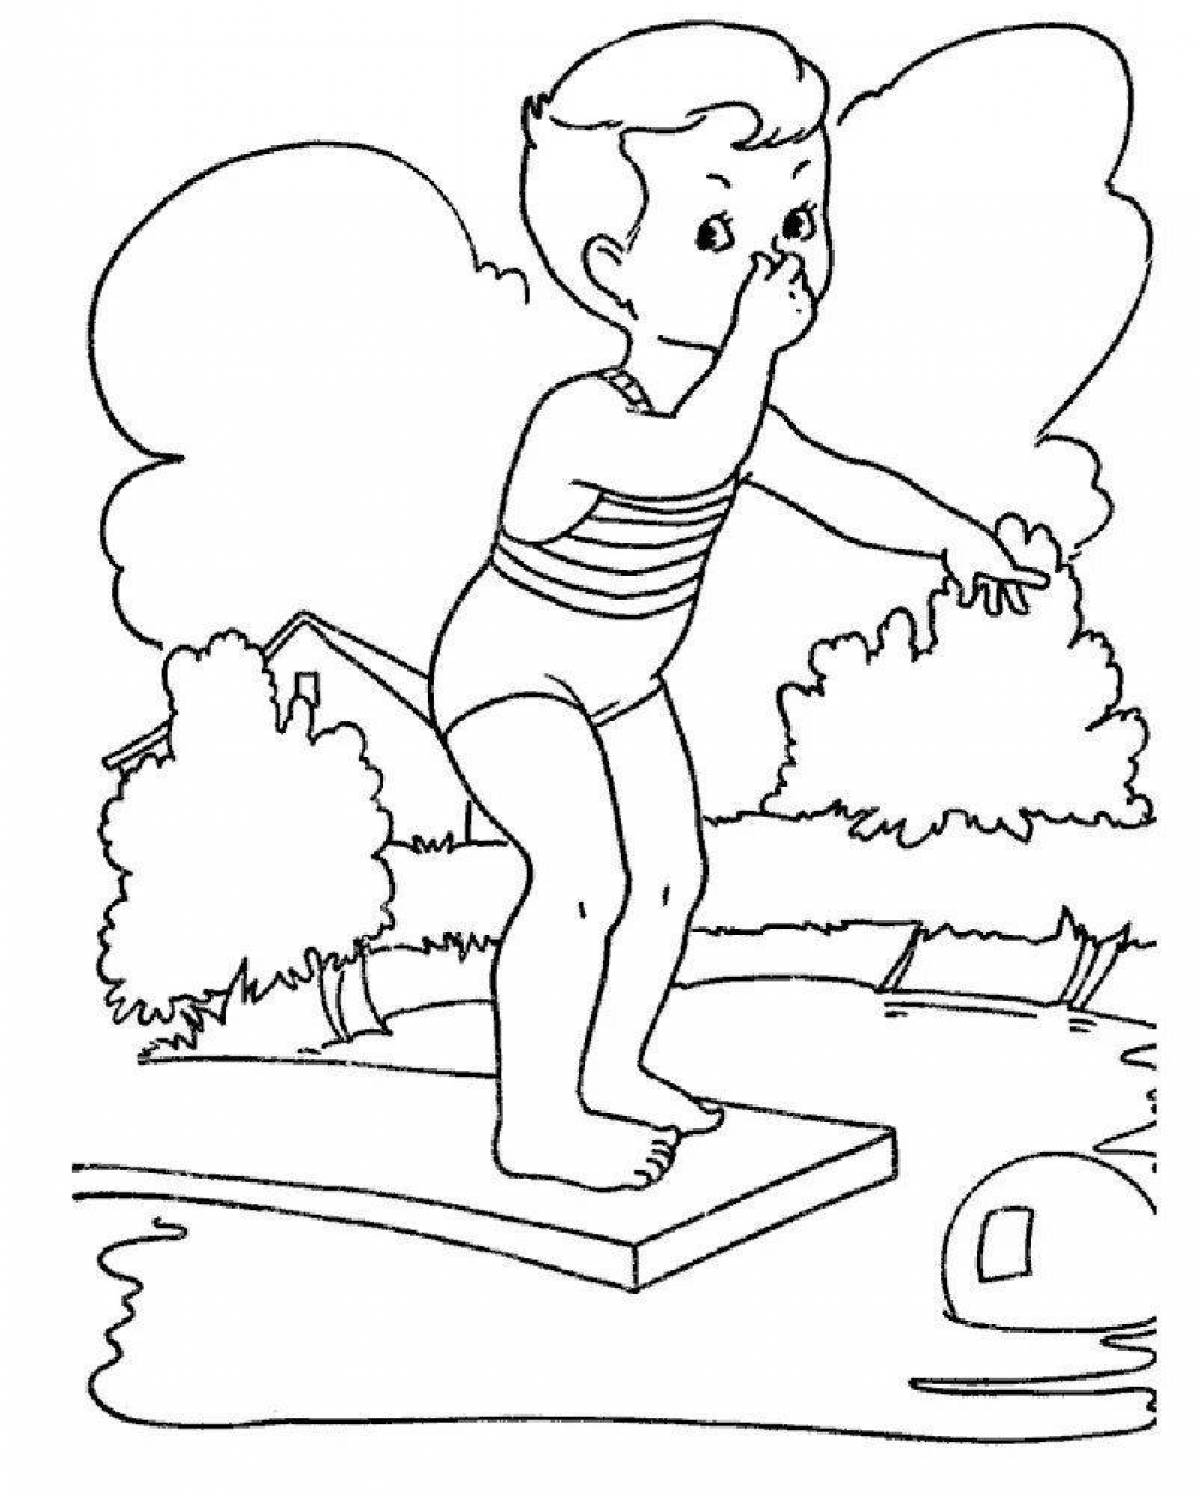 Animated summer sports coloring book